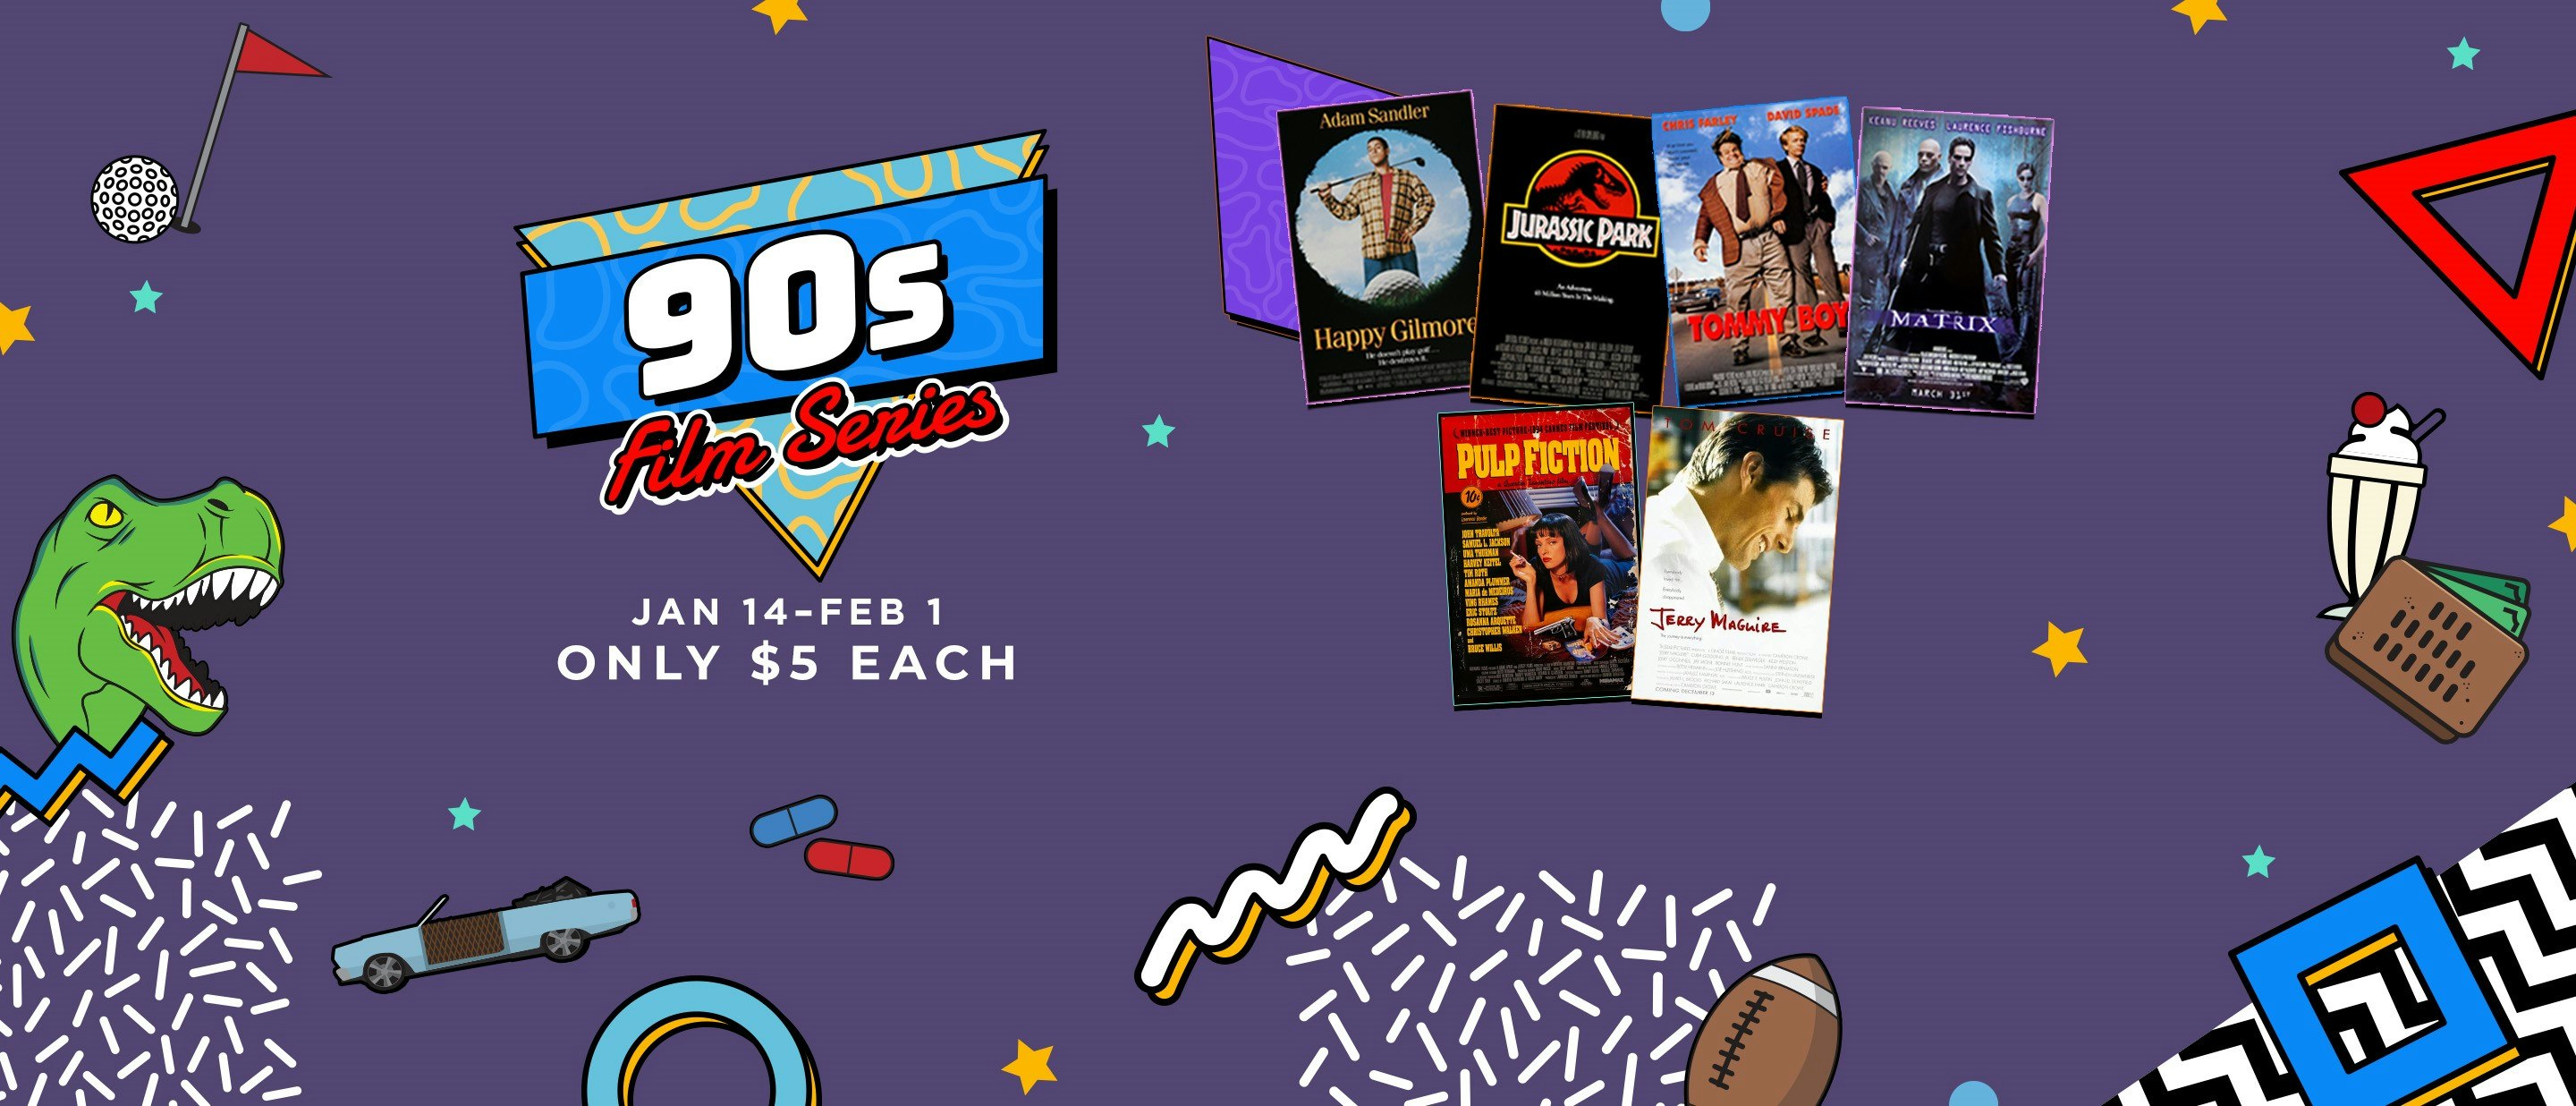 Harkins 90s Film Series, includes Happy Gilmore, Jurassic Park, Tommy Boy, Matrix, Pulp Fiction and Jerry Maguire film posters 